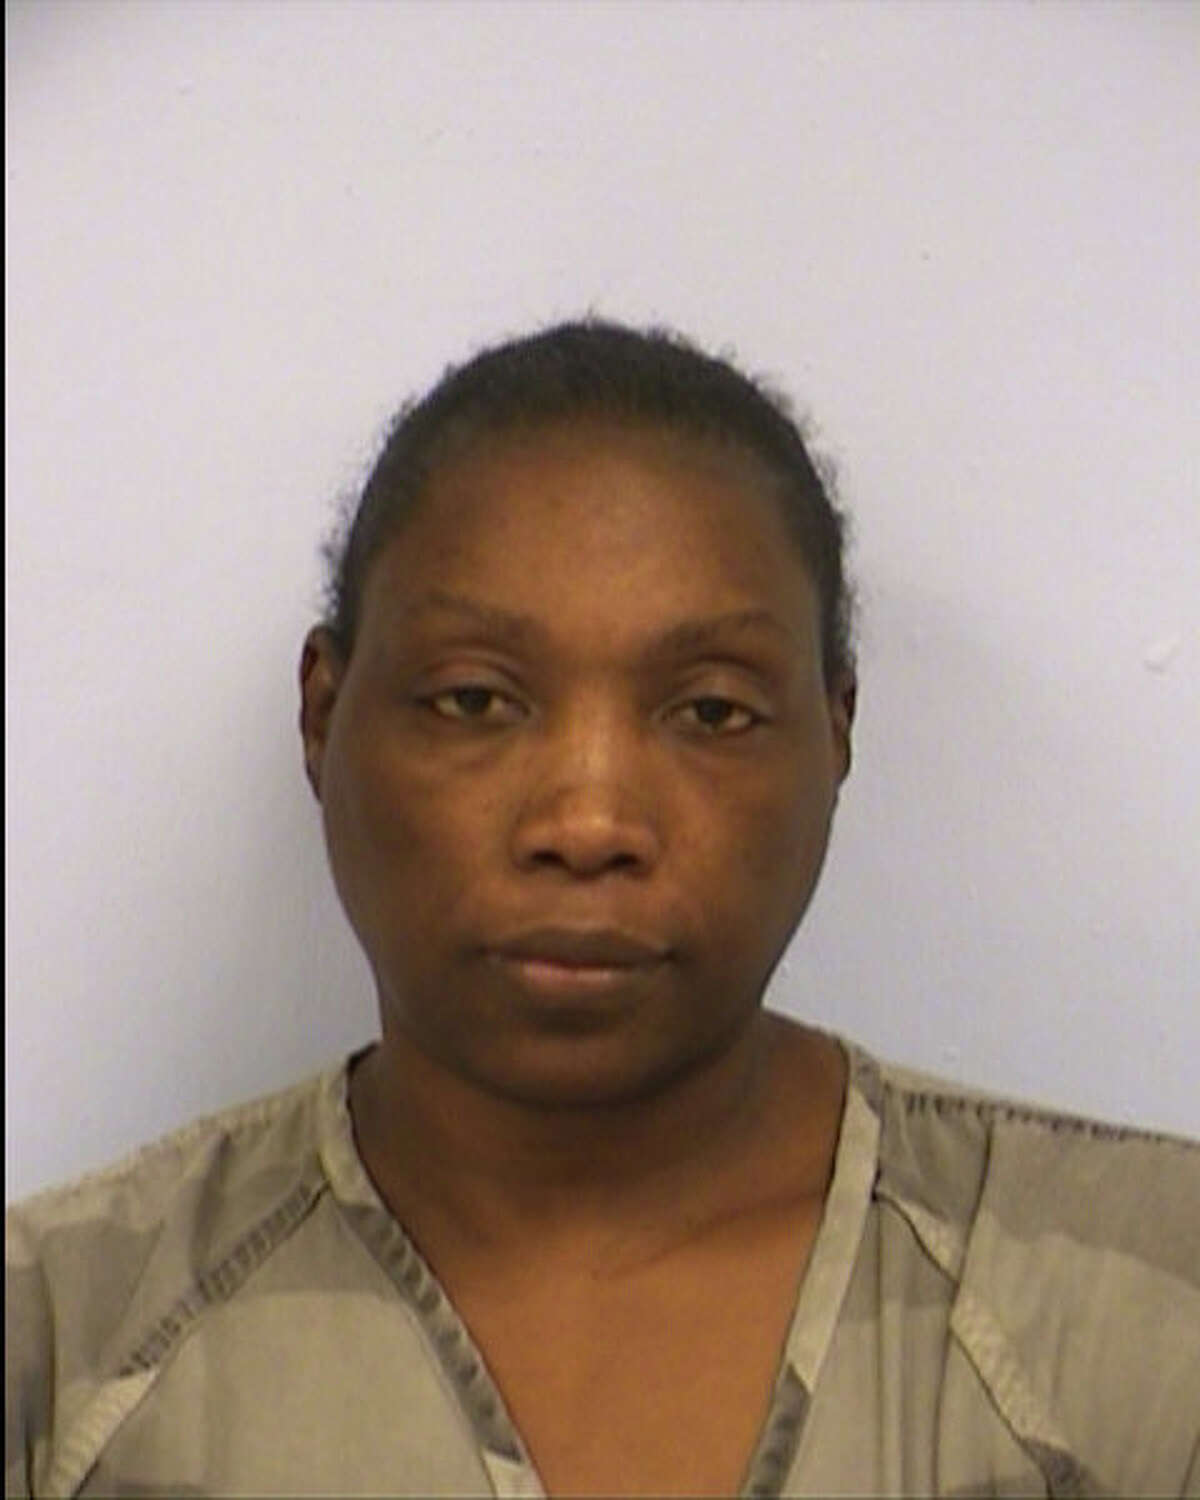 Renee Segura-Livingston, a 45-year-old woman accused of running an illegal assisted living facility in Austin and Belton, was booked Aug. 14, 2015, on a charge of interference with public duty, a class B misdemeanor. She was released from Travis County Jail on a $5,000 bond.